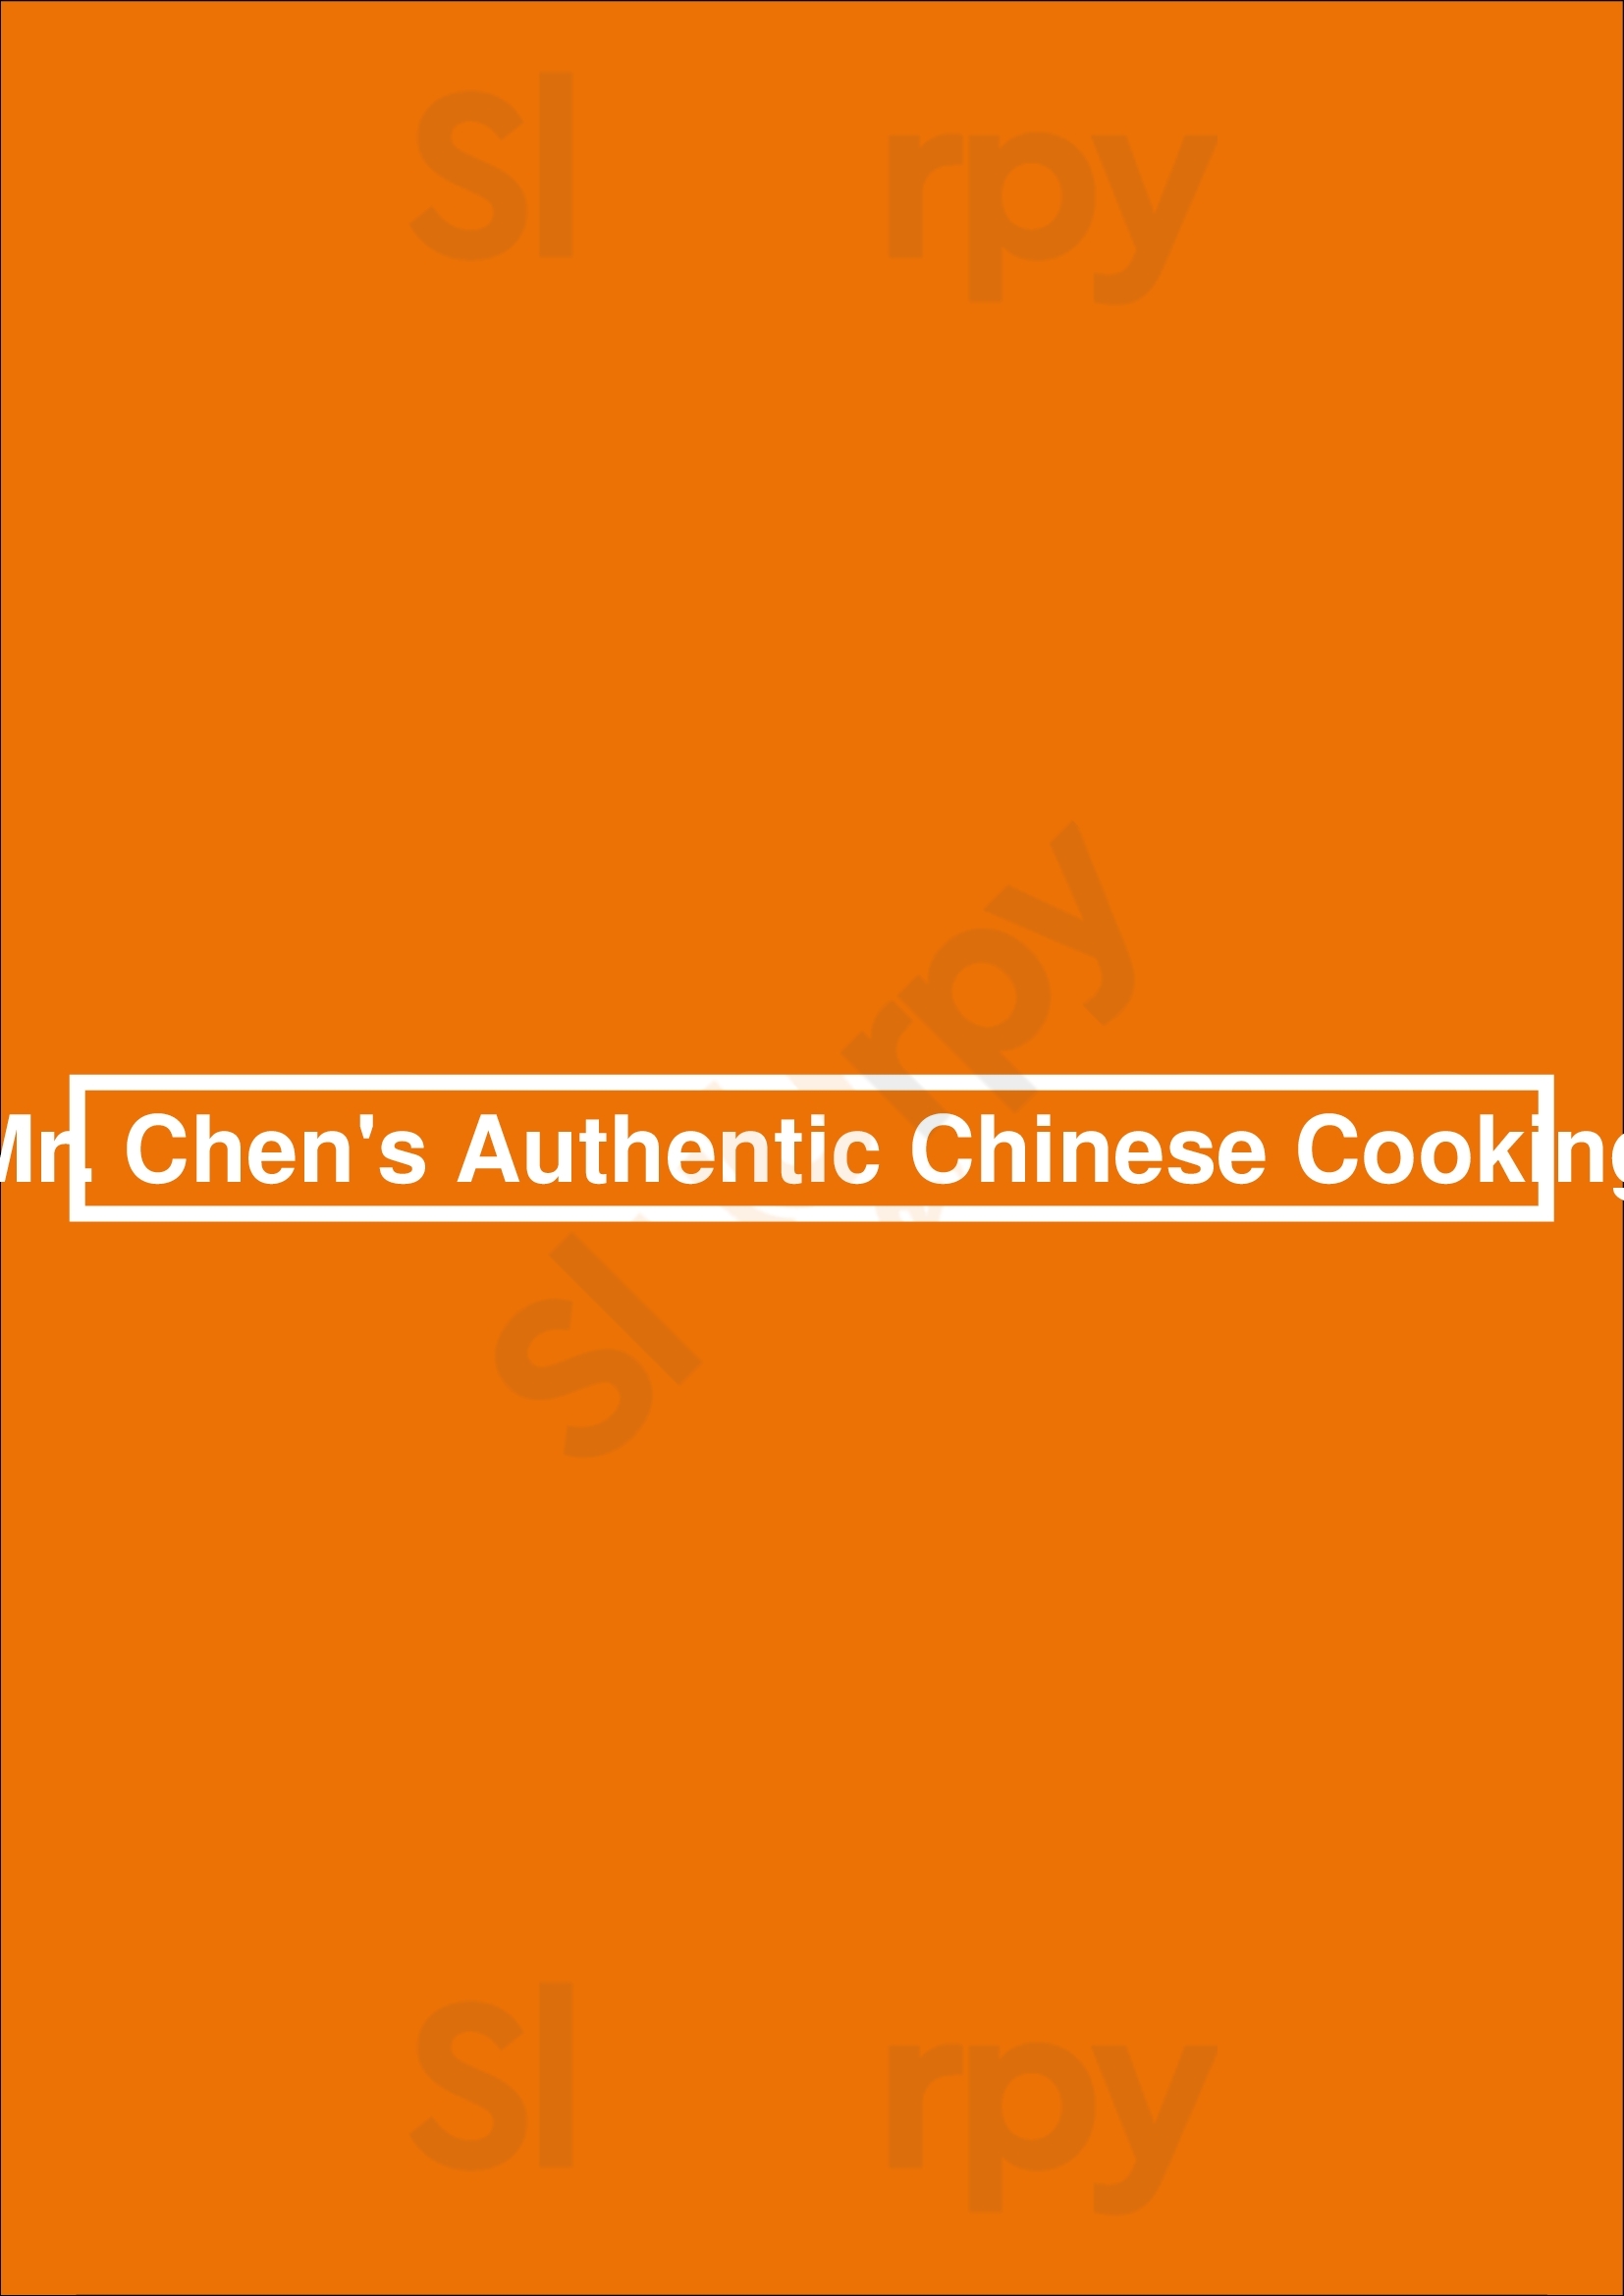 Mr. Chen's Authentic Chinese Cooking Homewood Menu - 1